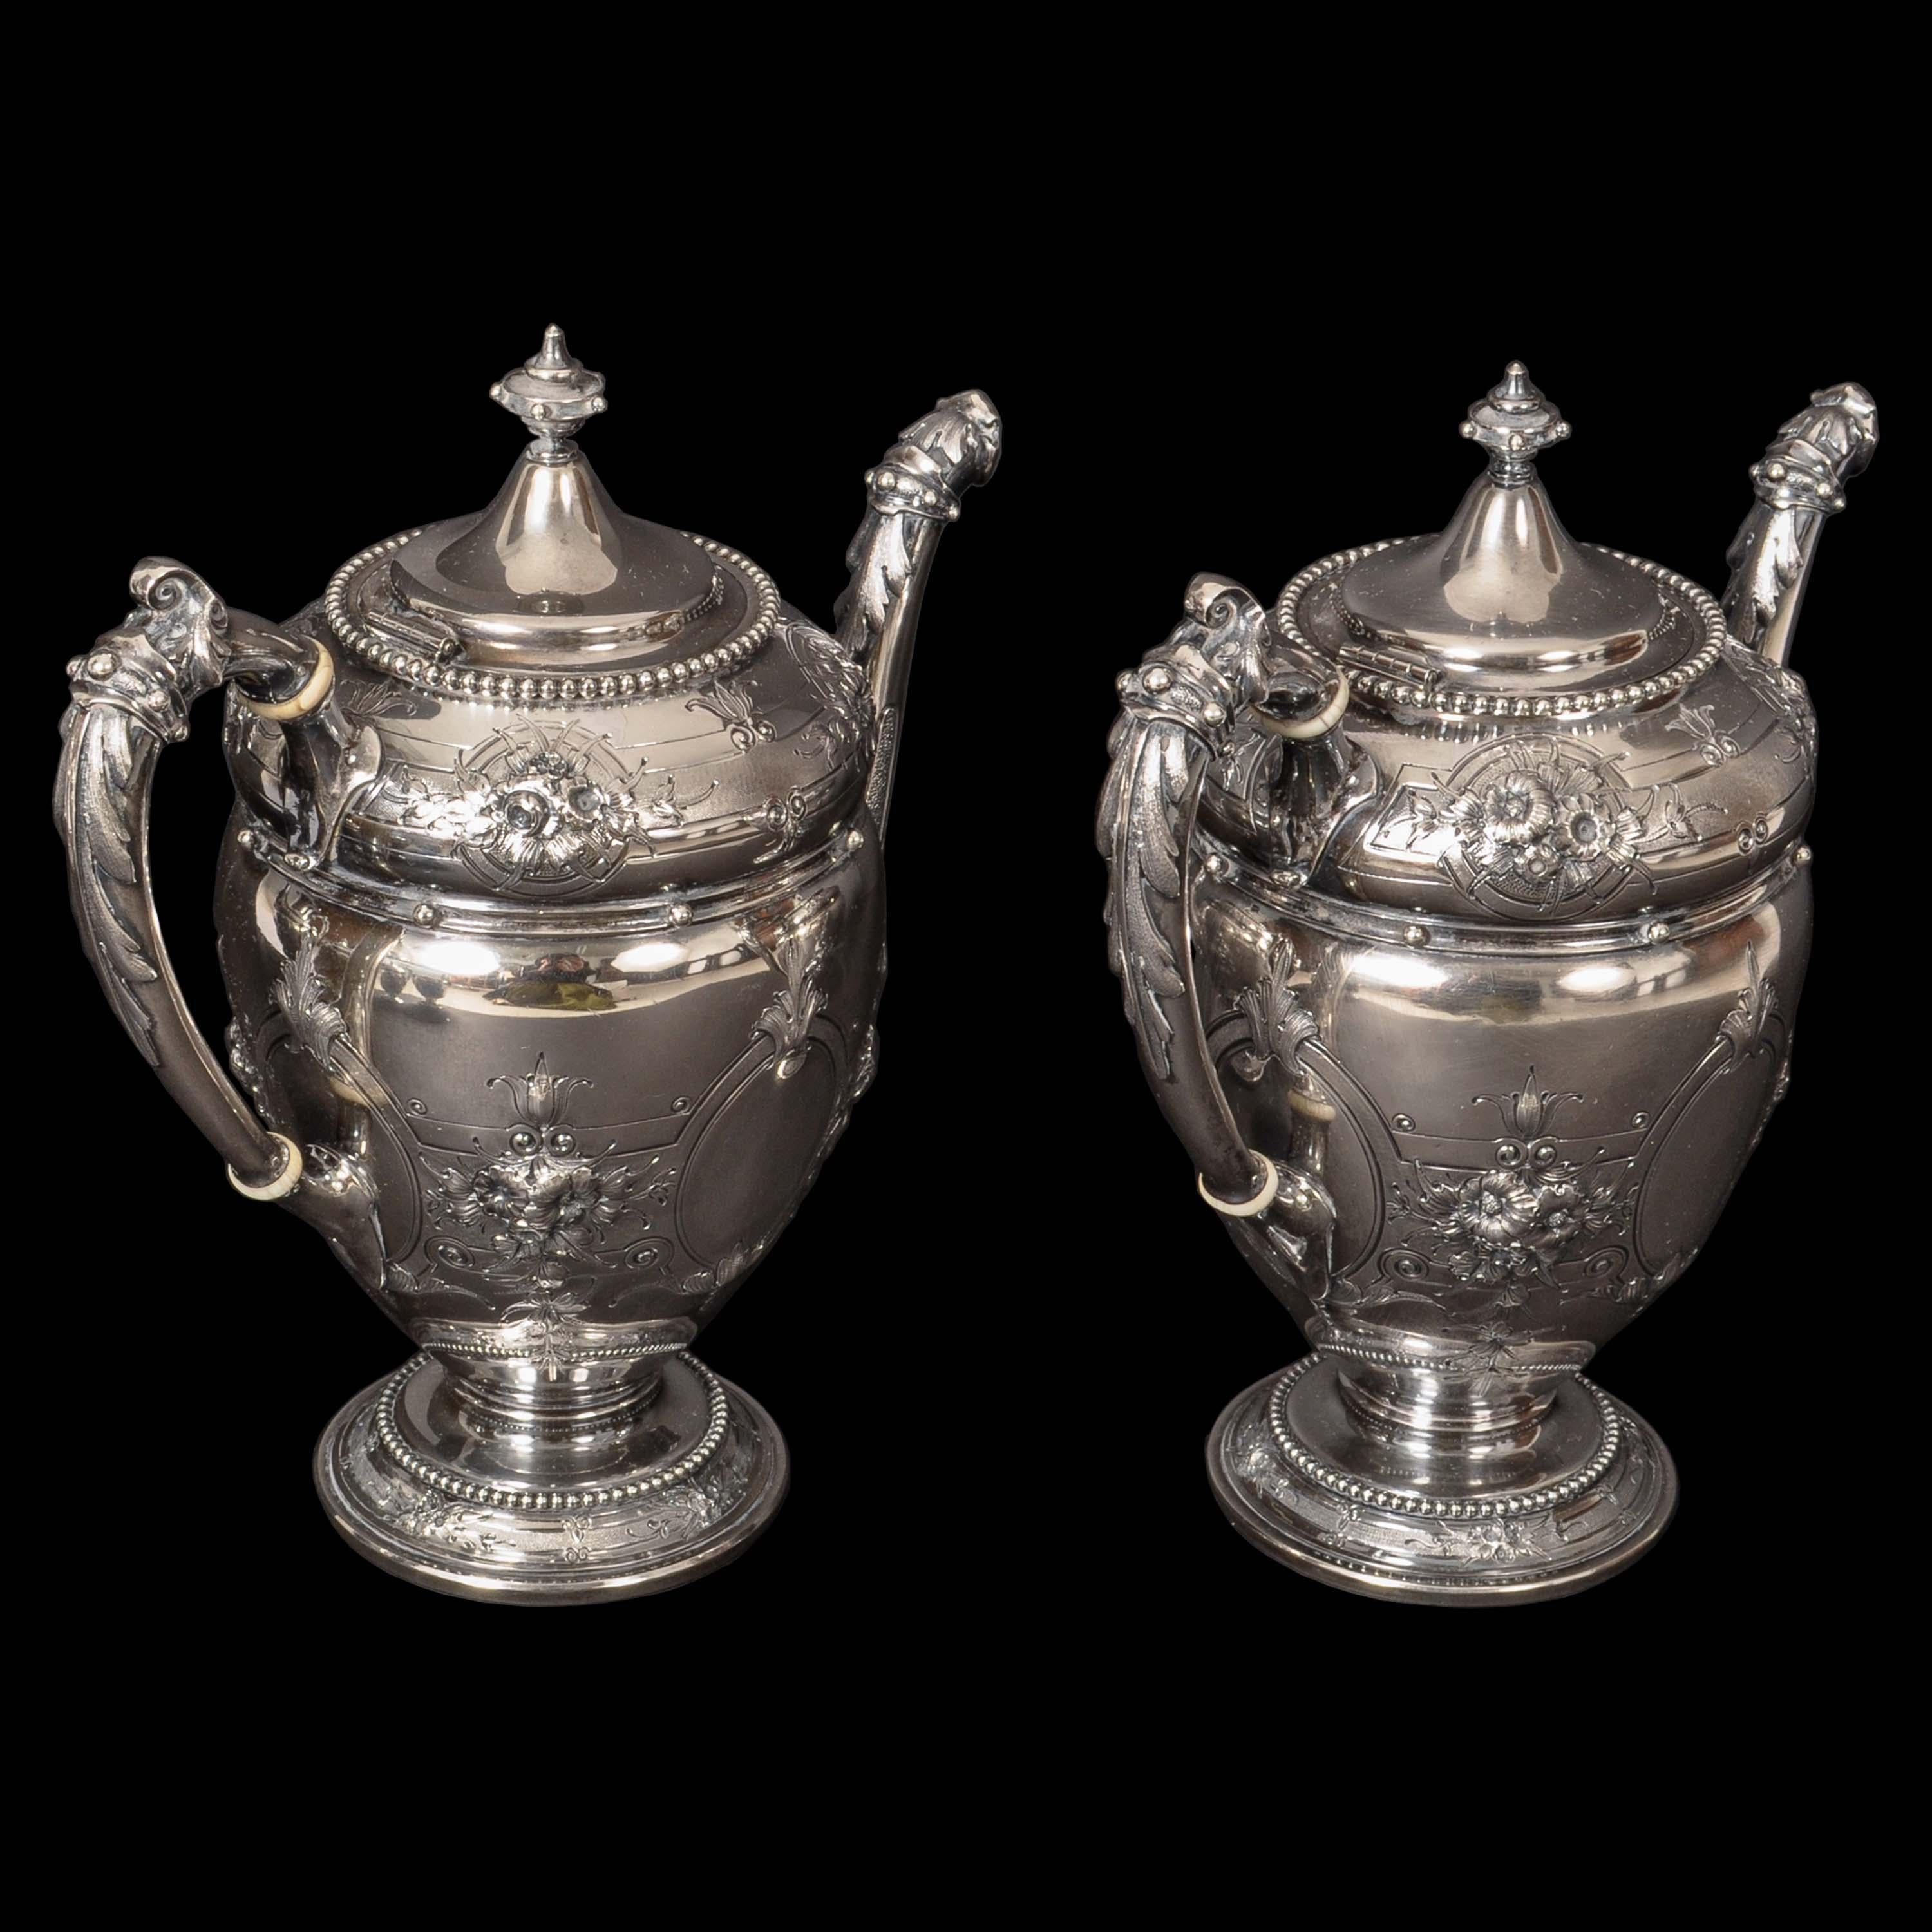 Repoussé Antique American Gorham Coin Silver Mary Todd Lincoln Tea & Coffee Service, 1861 For Sale